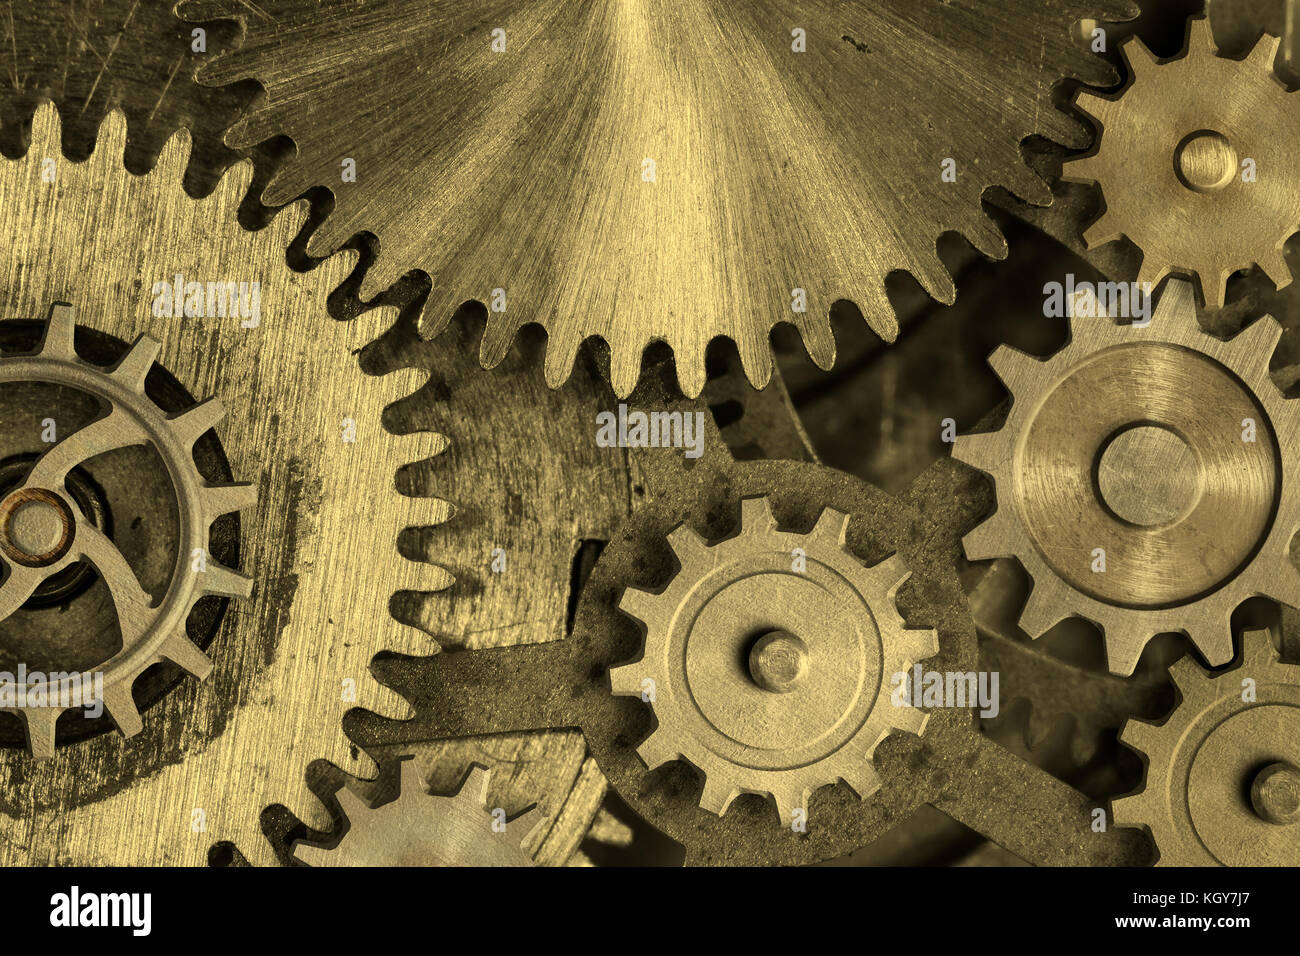 Cog and gear wheels golden background 3d illustration Stock Photo